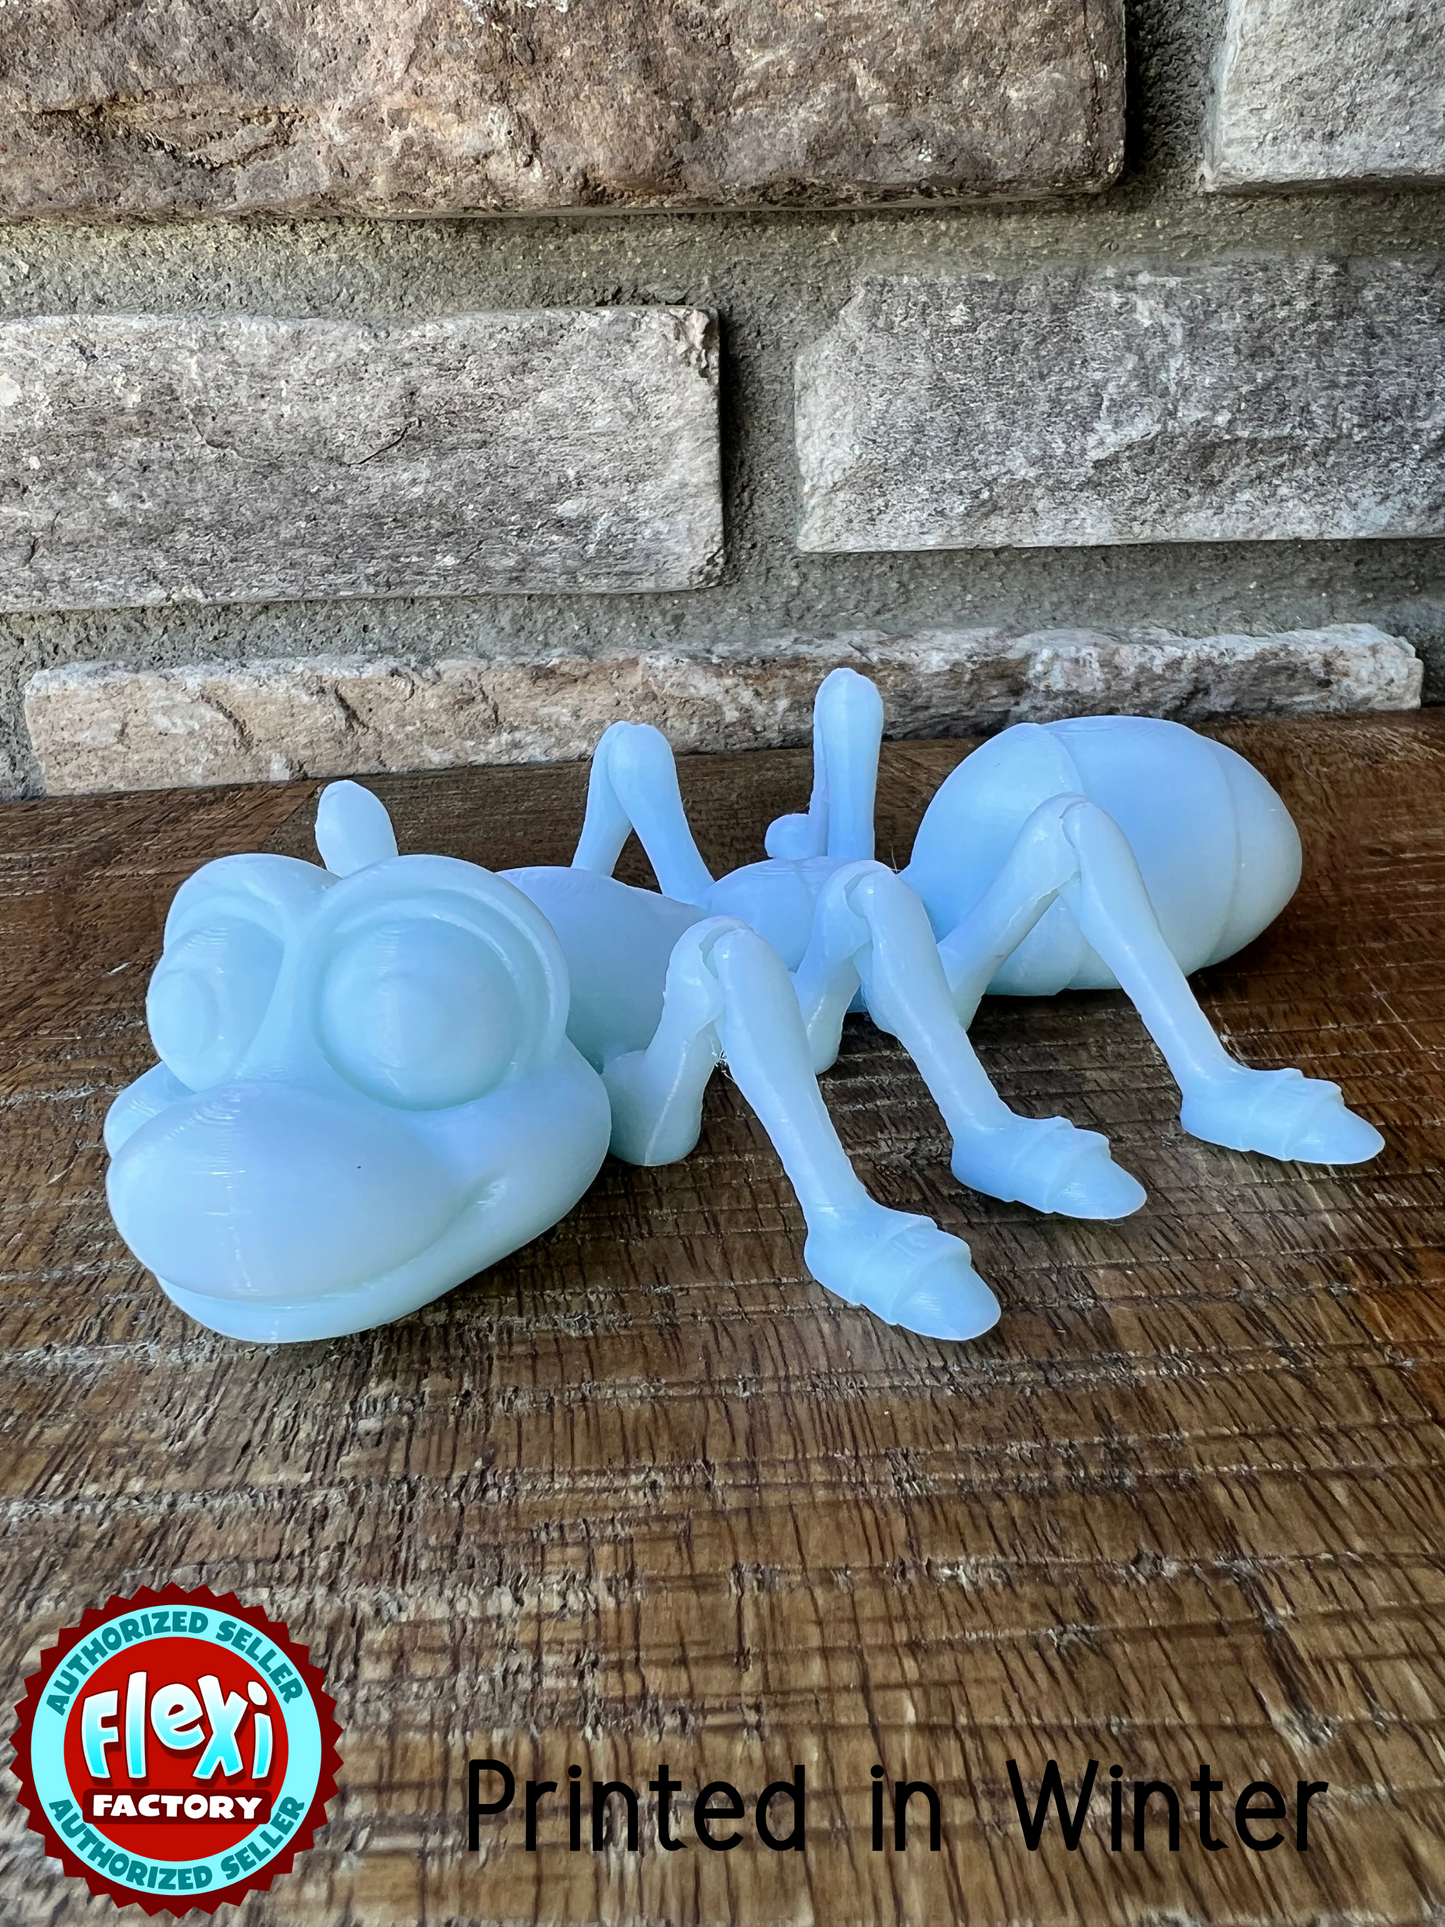 Ant | 3d Printed | Articulated Flexible | Custom Fidget Toy